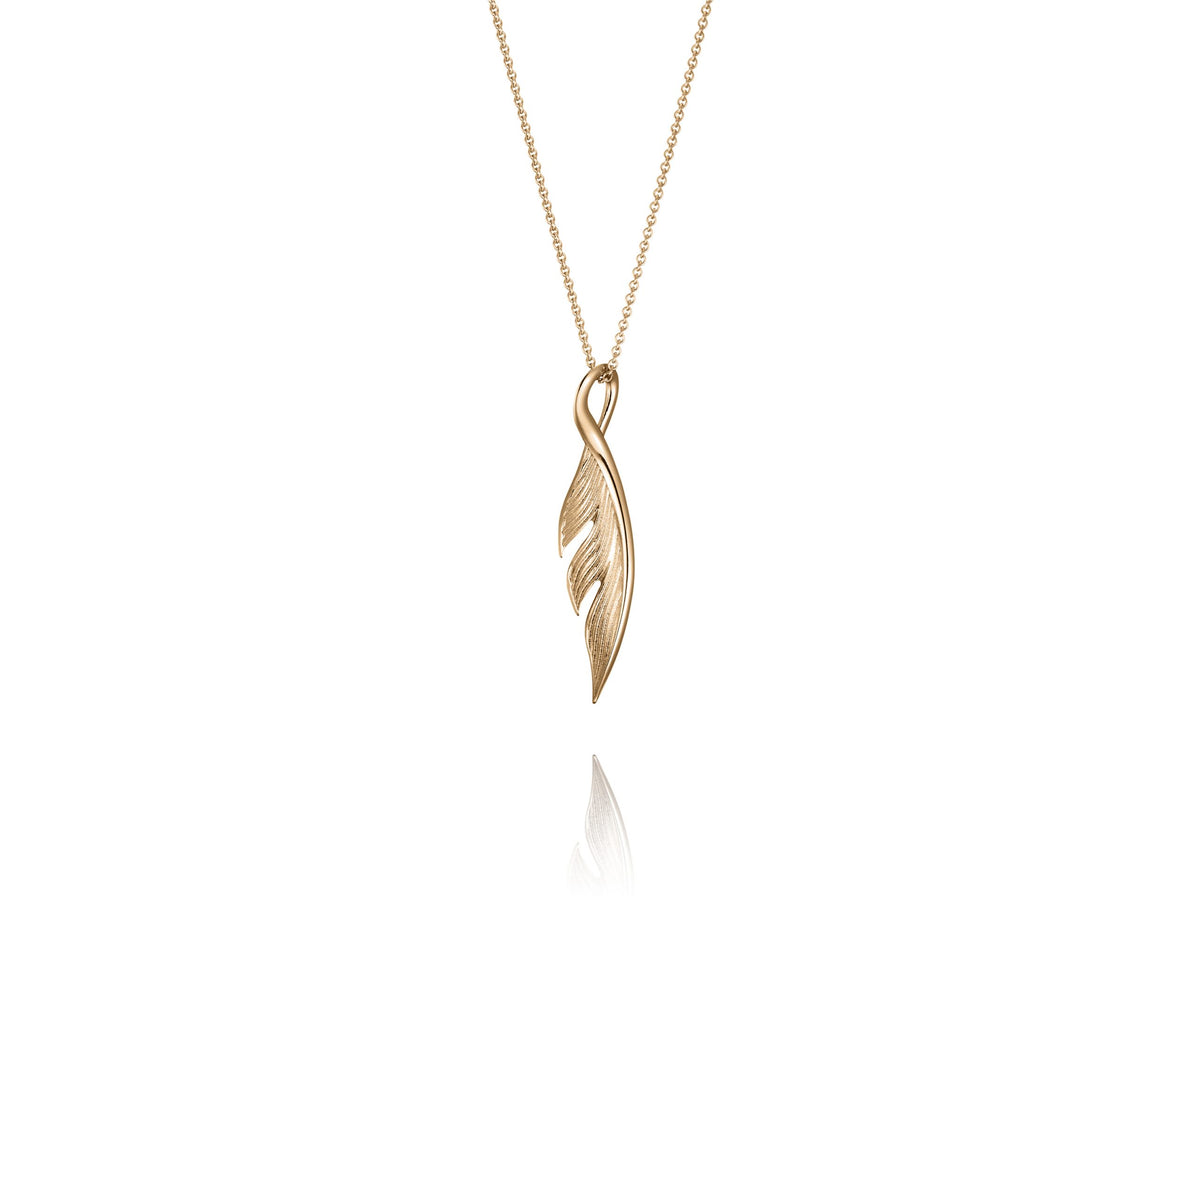 Articulated Diamond Feather Necklace in Yellow Gold